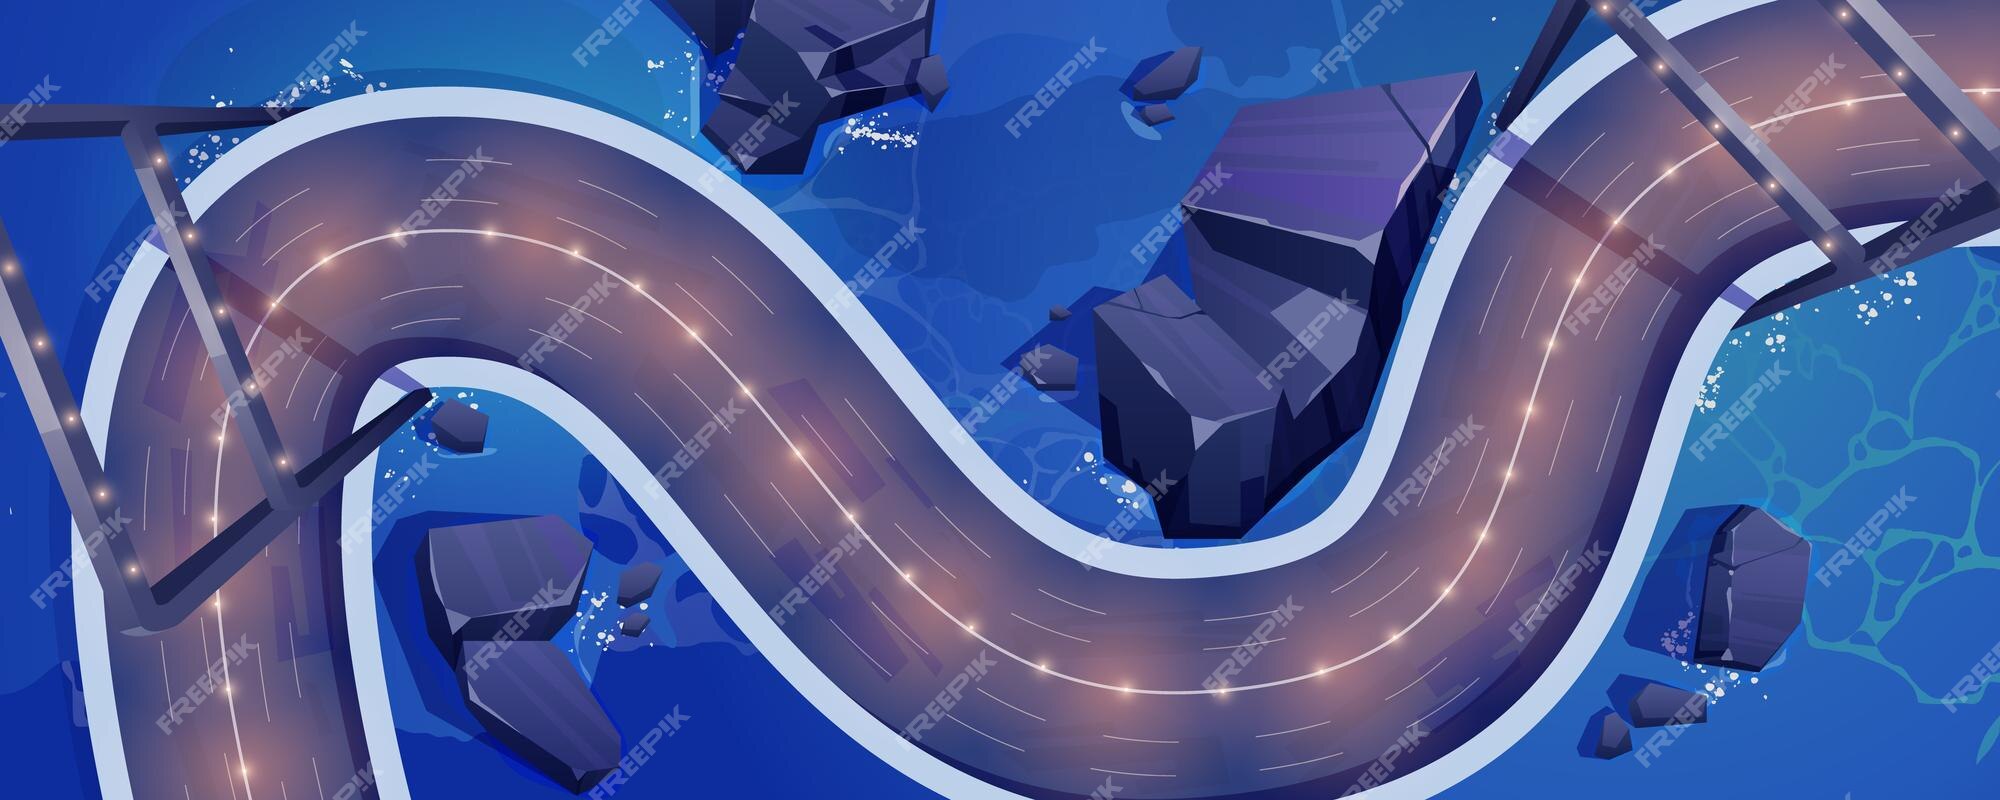 congestion belief Right Free Vector | Top view of overpass car road with light markers at night  vector cartoon illustration of empty winding race track for auto rally  competition aerial view of highway over water